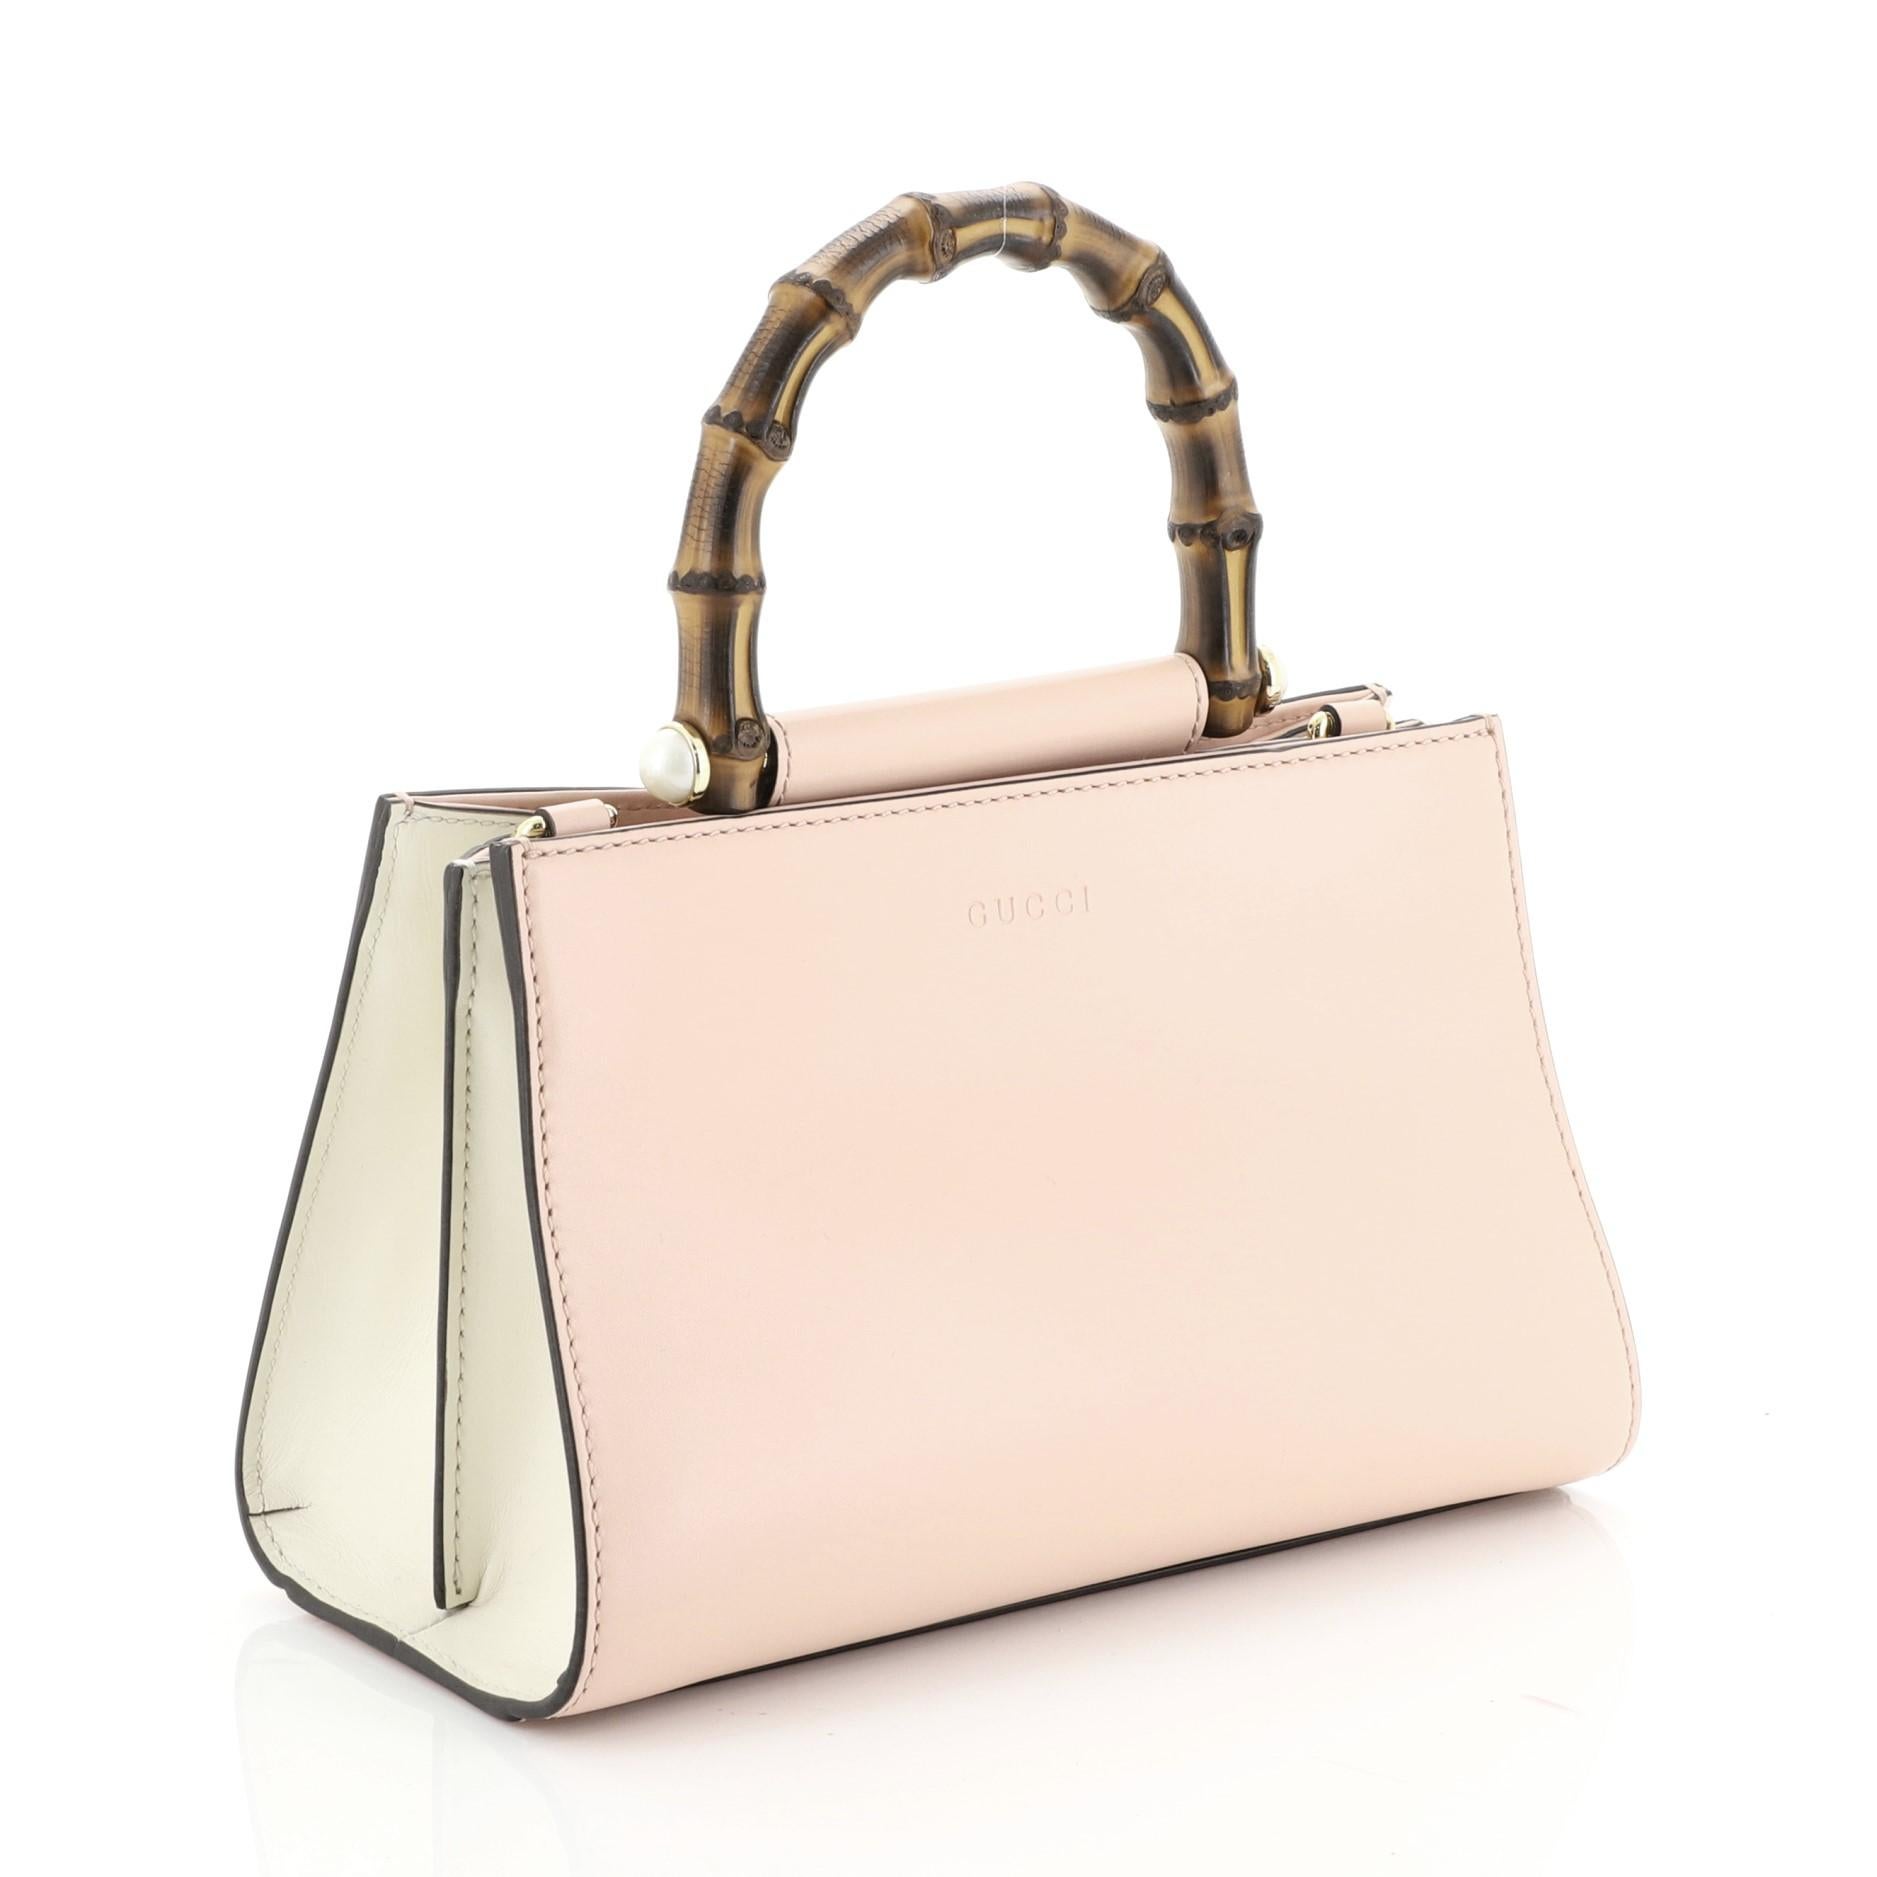 White Gucci Nymphaea Top Handle Bag Leather Mini